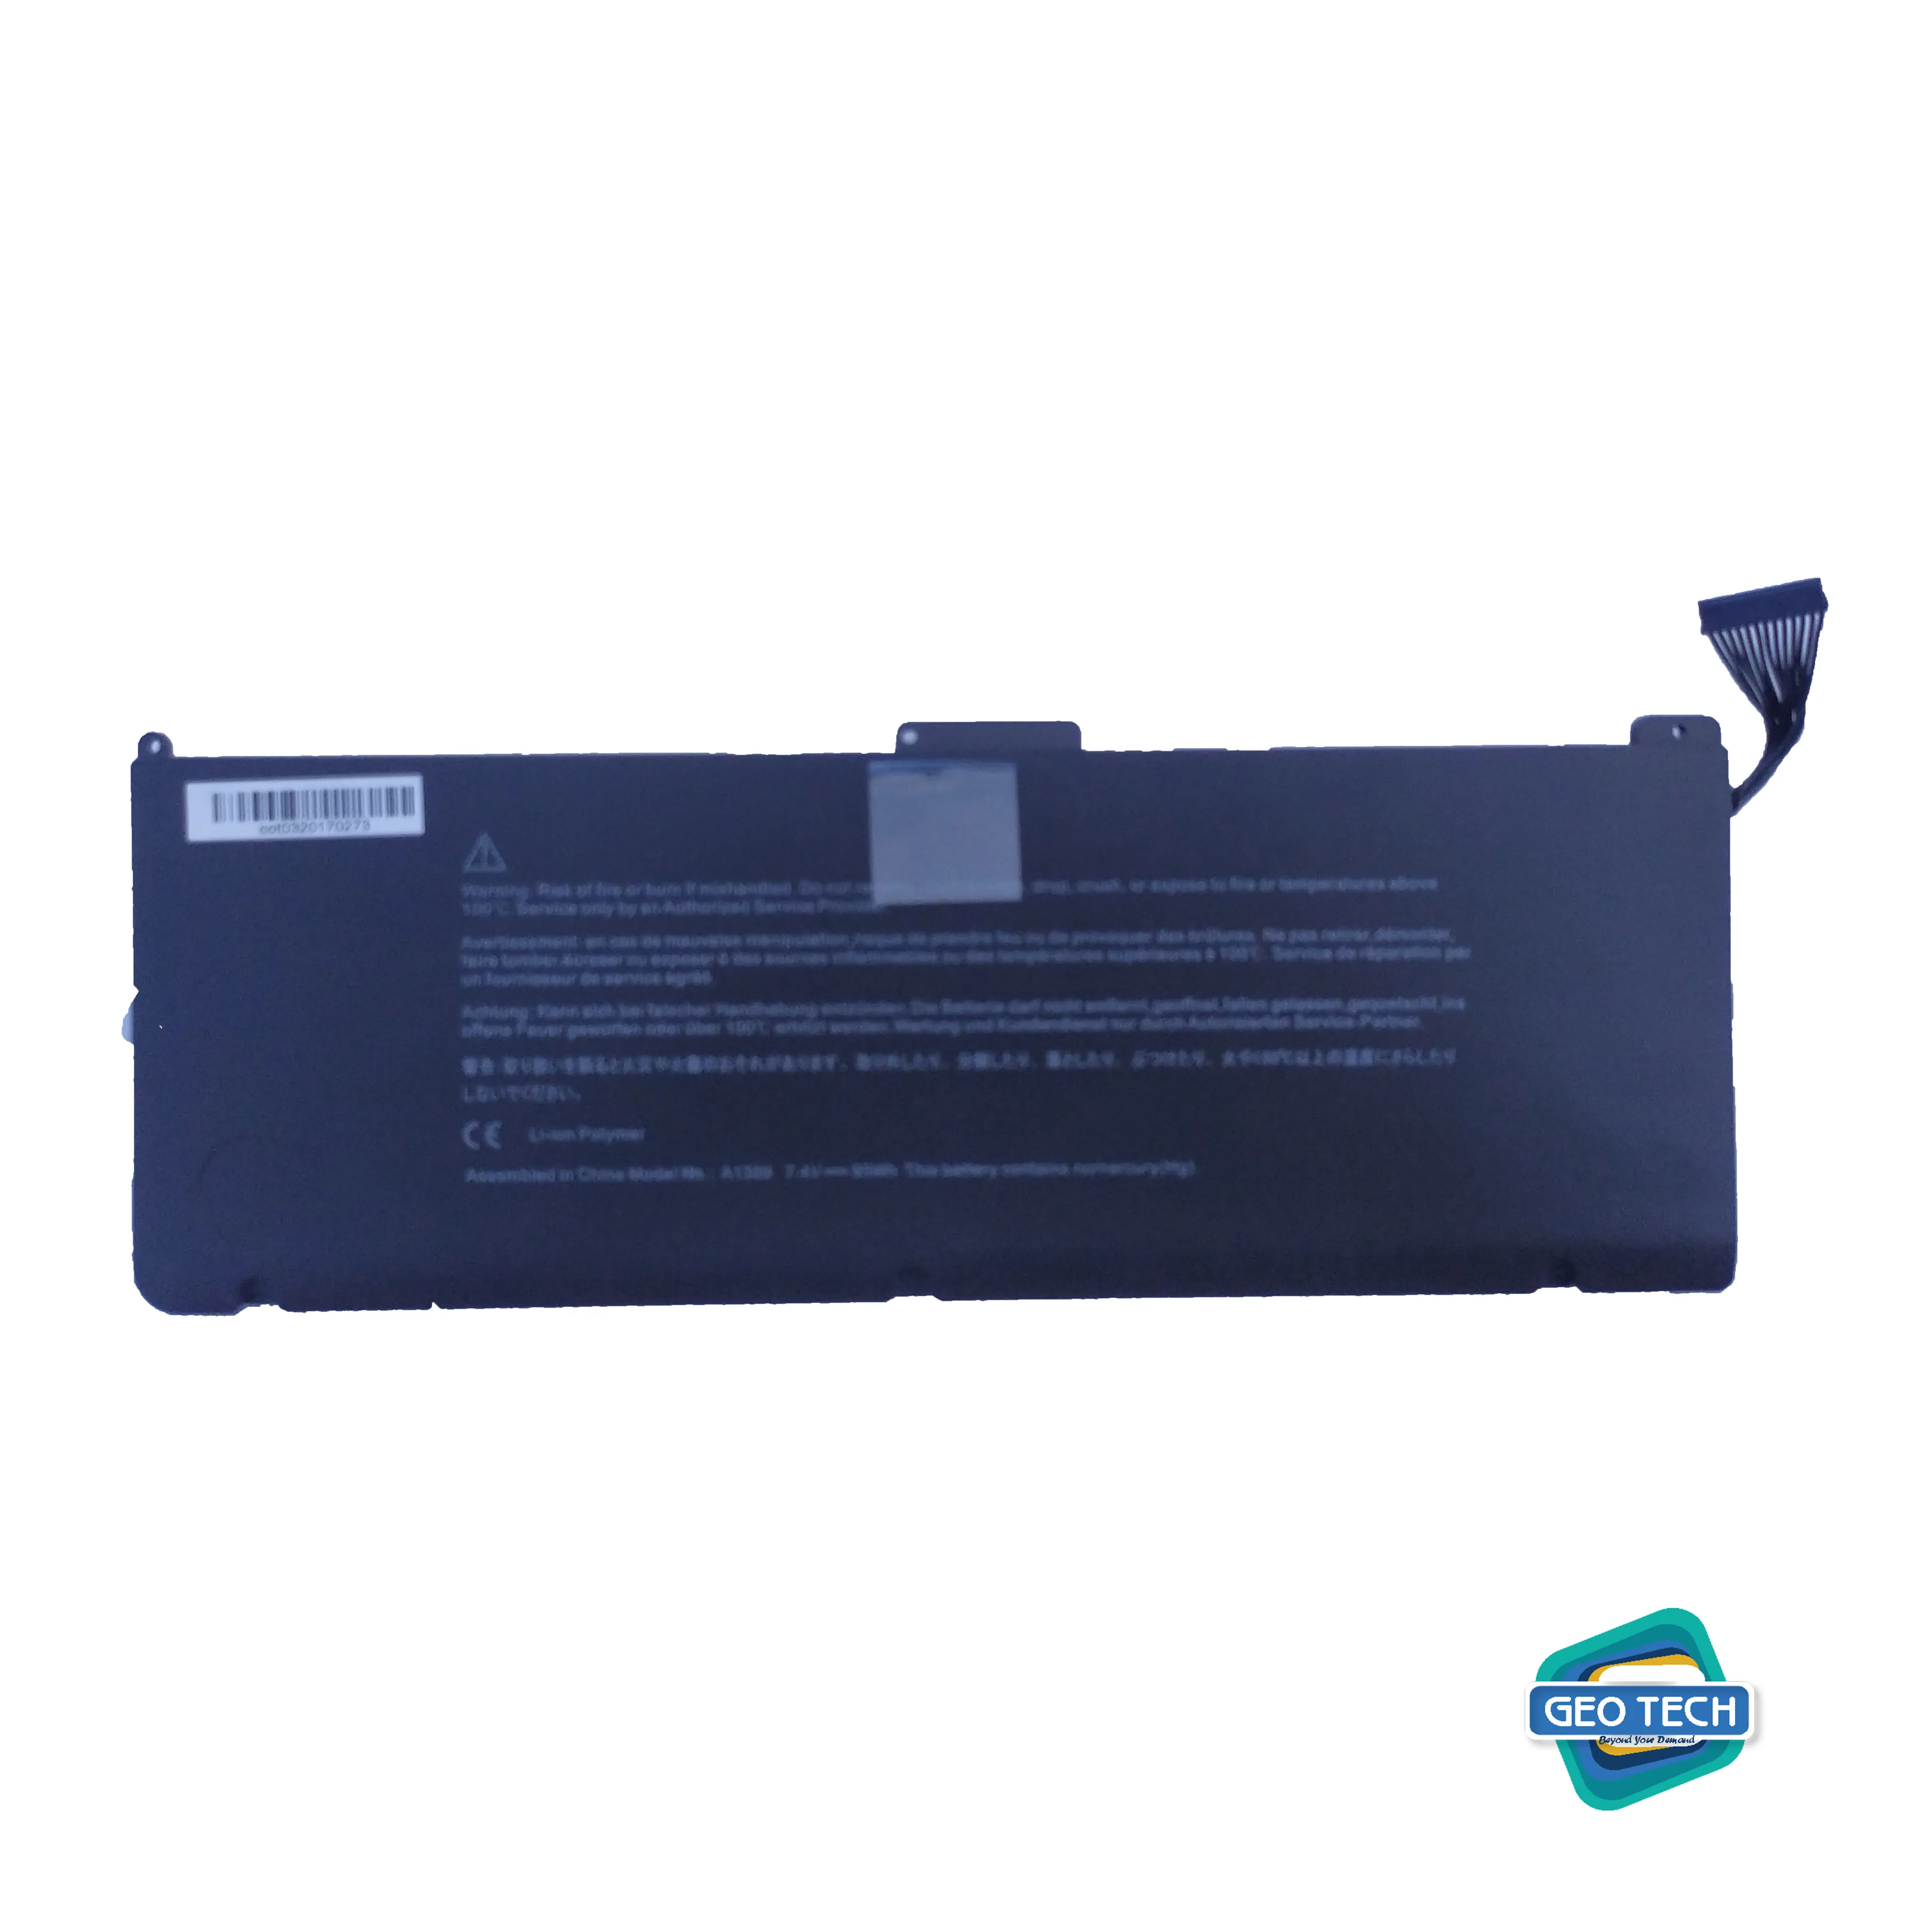 New A1309 Laptop Battery Compatible for MacBook Pro 17" A1297 (Only fit Early 2009 Mid-2009 Mid-2010),fits MC226/A MC226CH/A MC226J/A 020-6313-C 661-5037-A